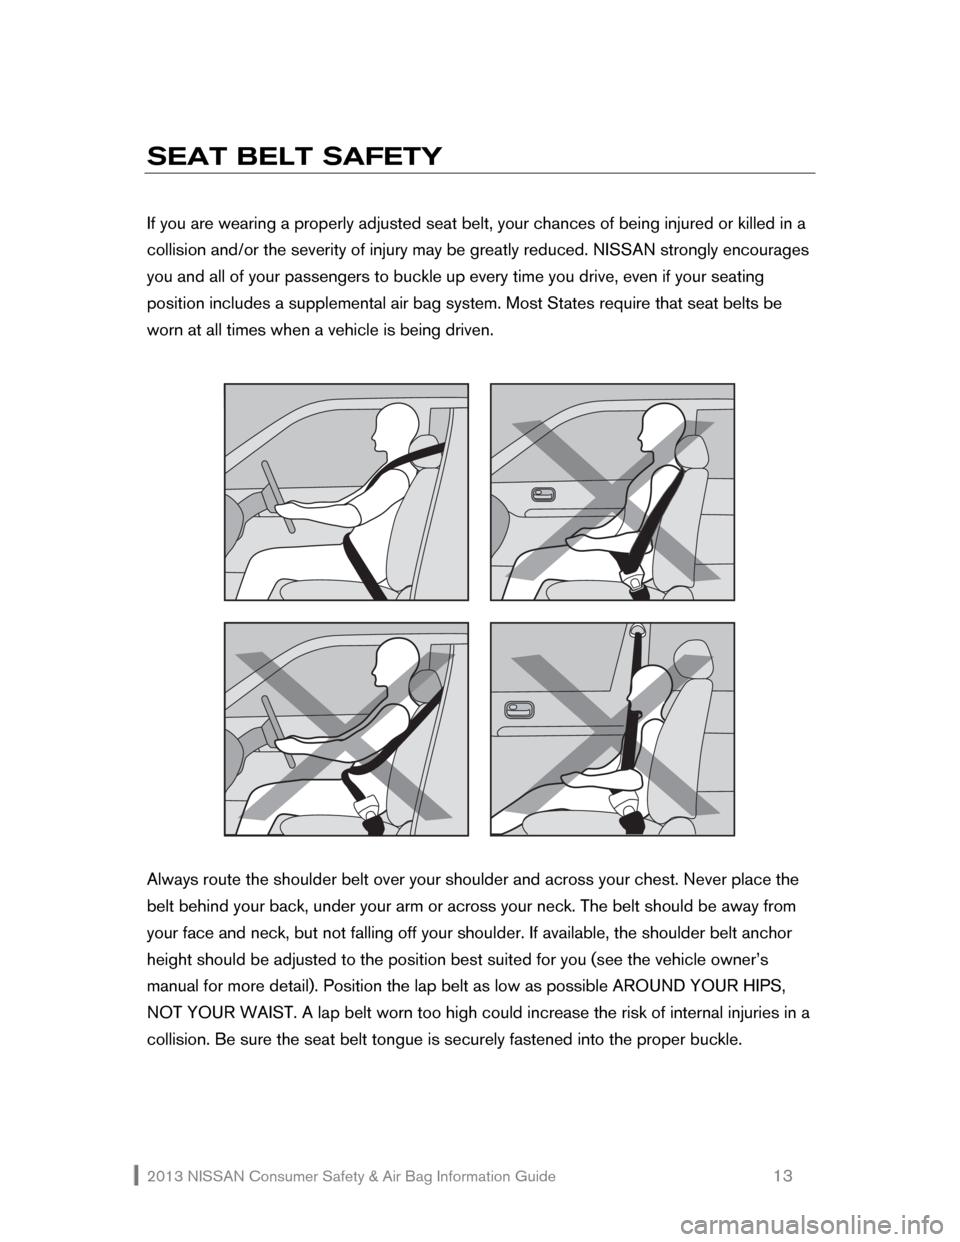 NISSAN ROGUE 2013 2.G Consumer Safety Air Bag Information Guide 2013 NISSAN Consumer Safety & Air Bag Information Guide                                                   13 
SEAT BELT SAFETY 
 
If you are wearing a properly adjusted seat belt, your chances of bein